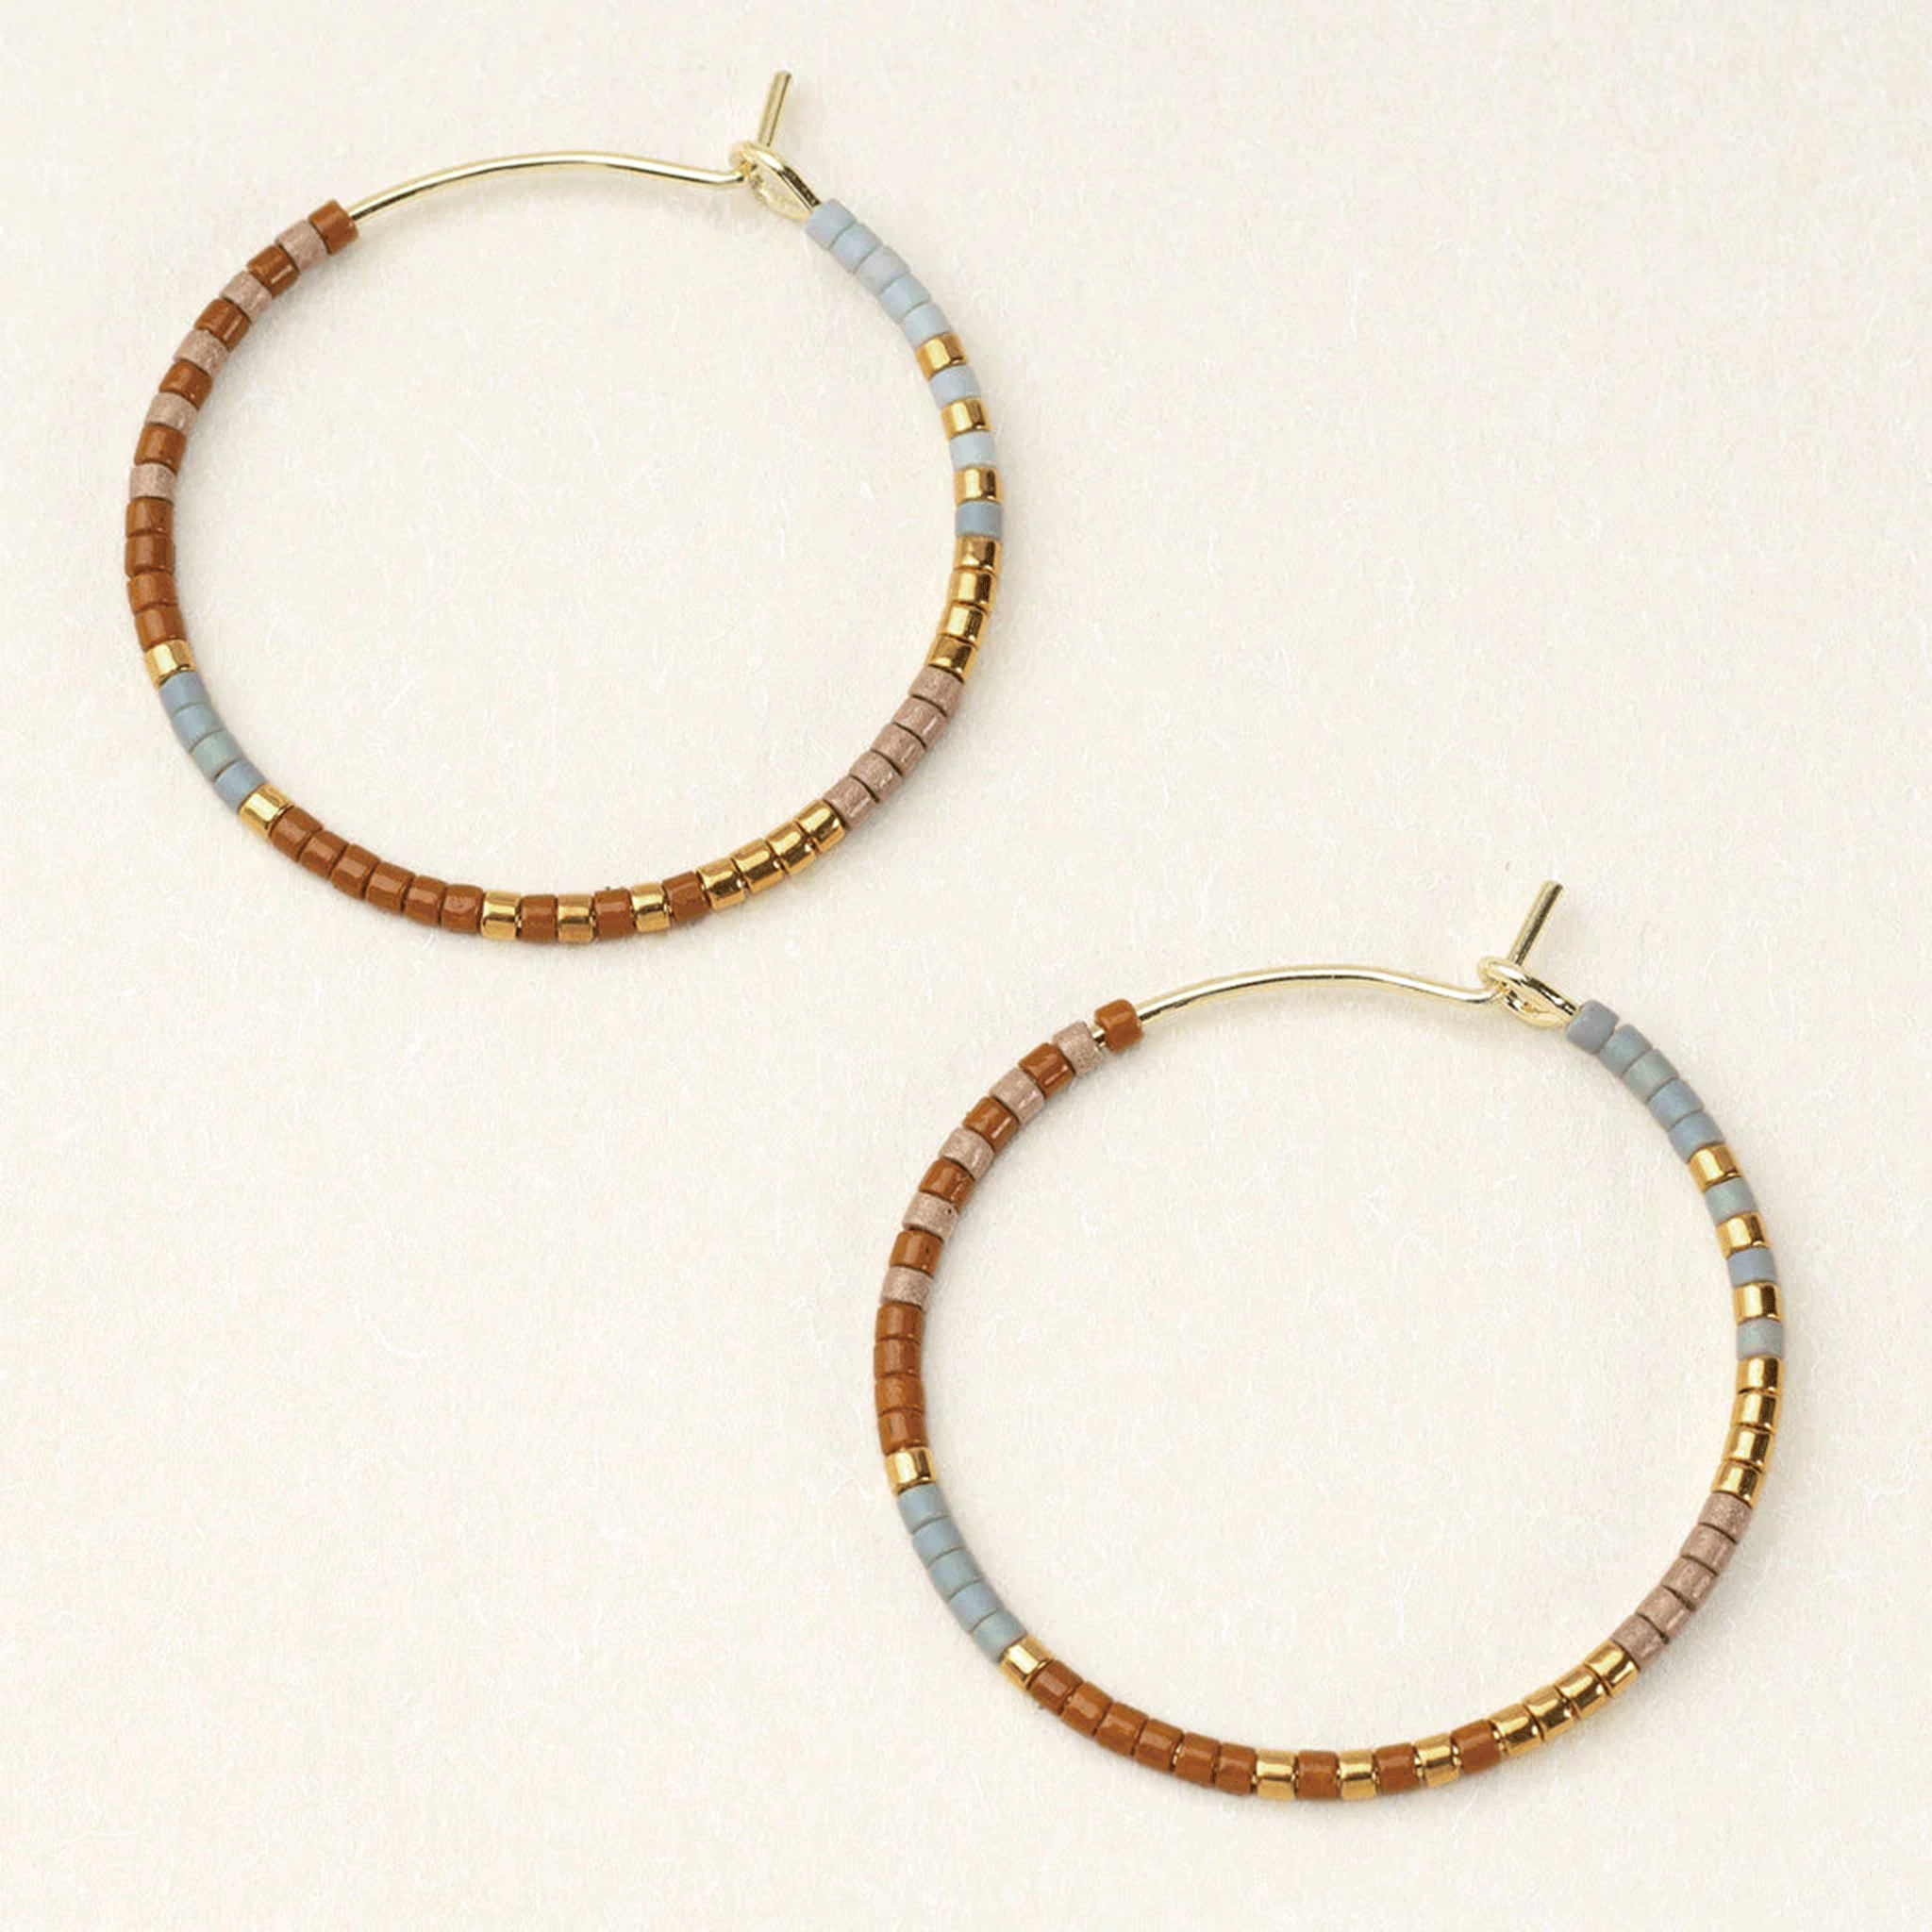 On an ivory background is a pair of gold hoops with multi-colored beads.